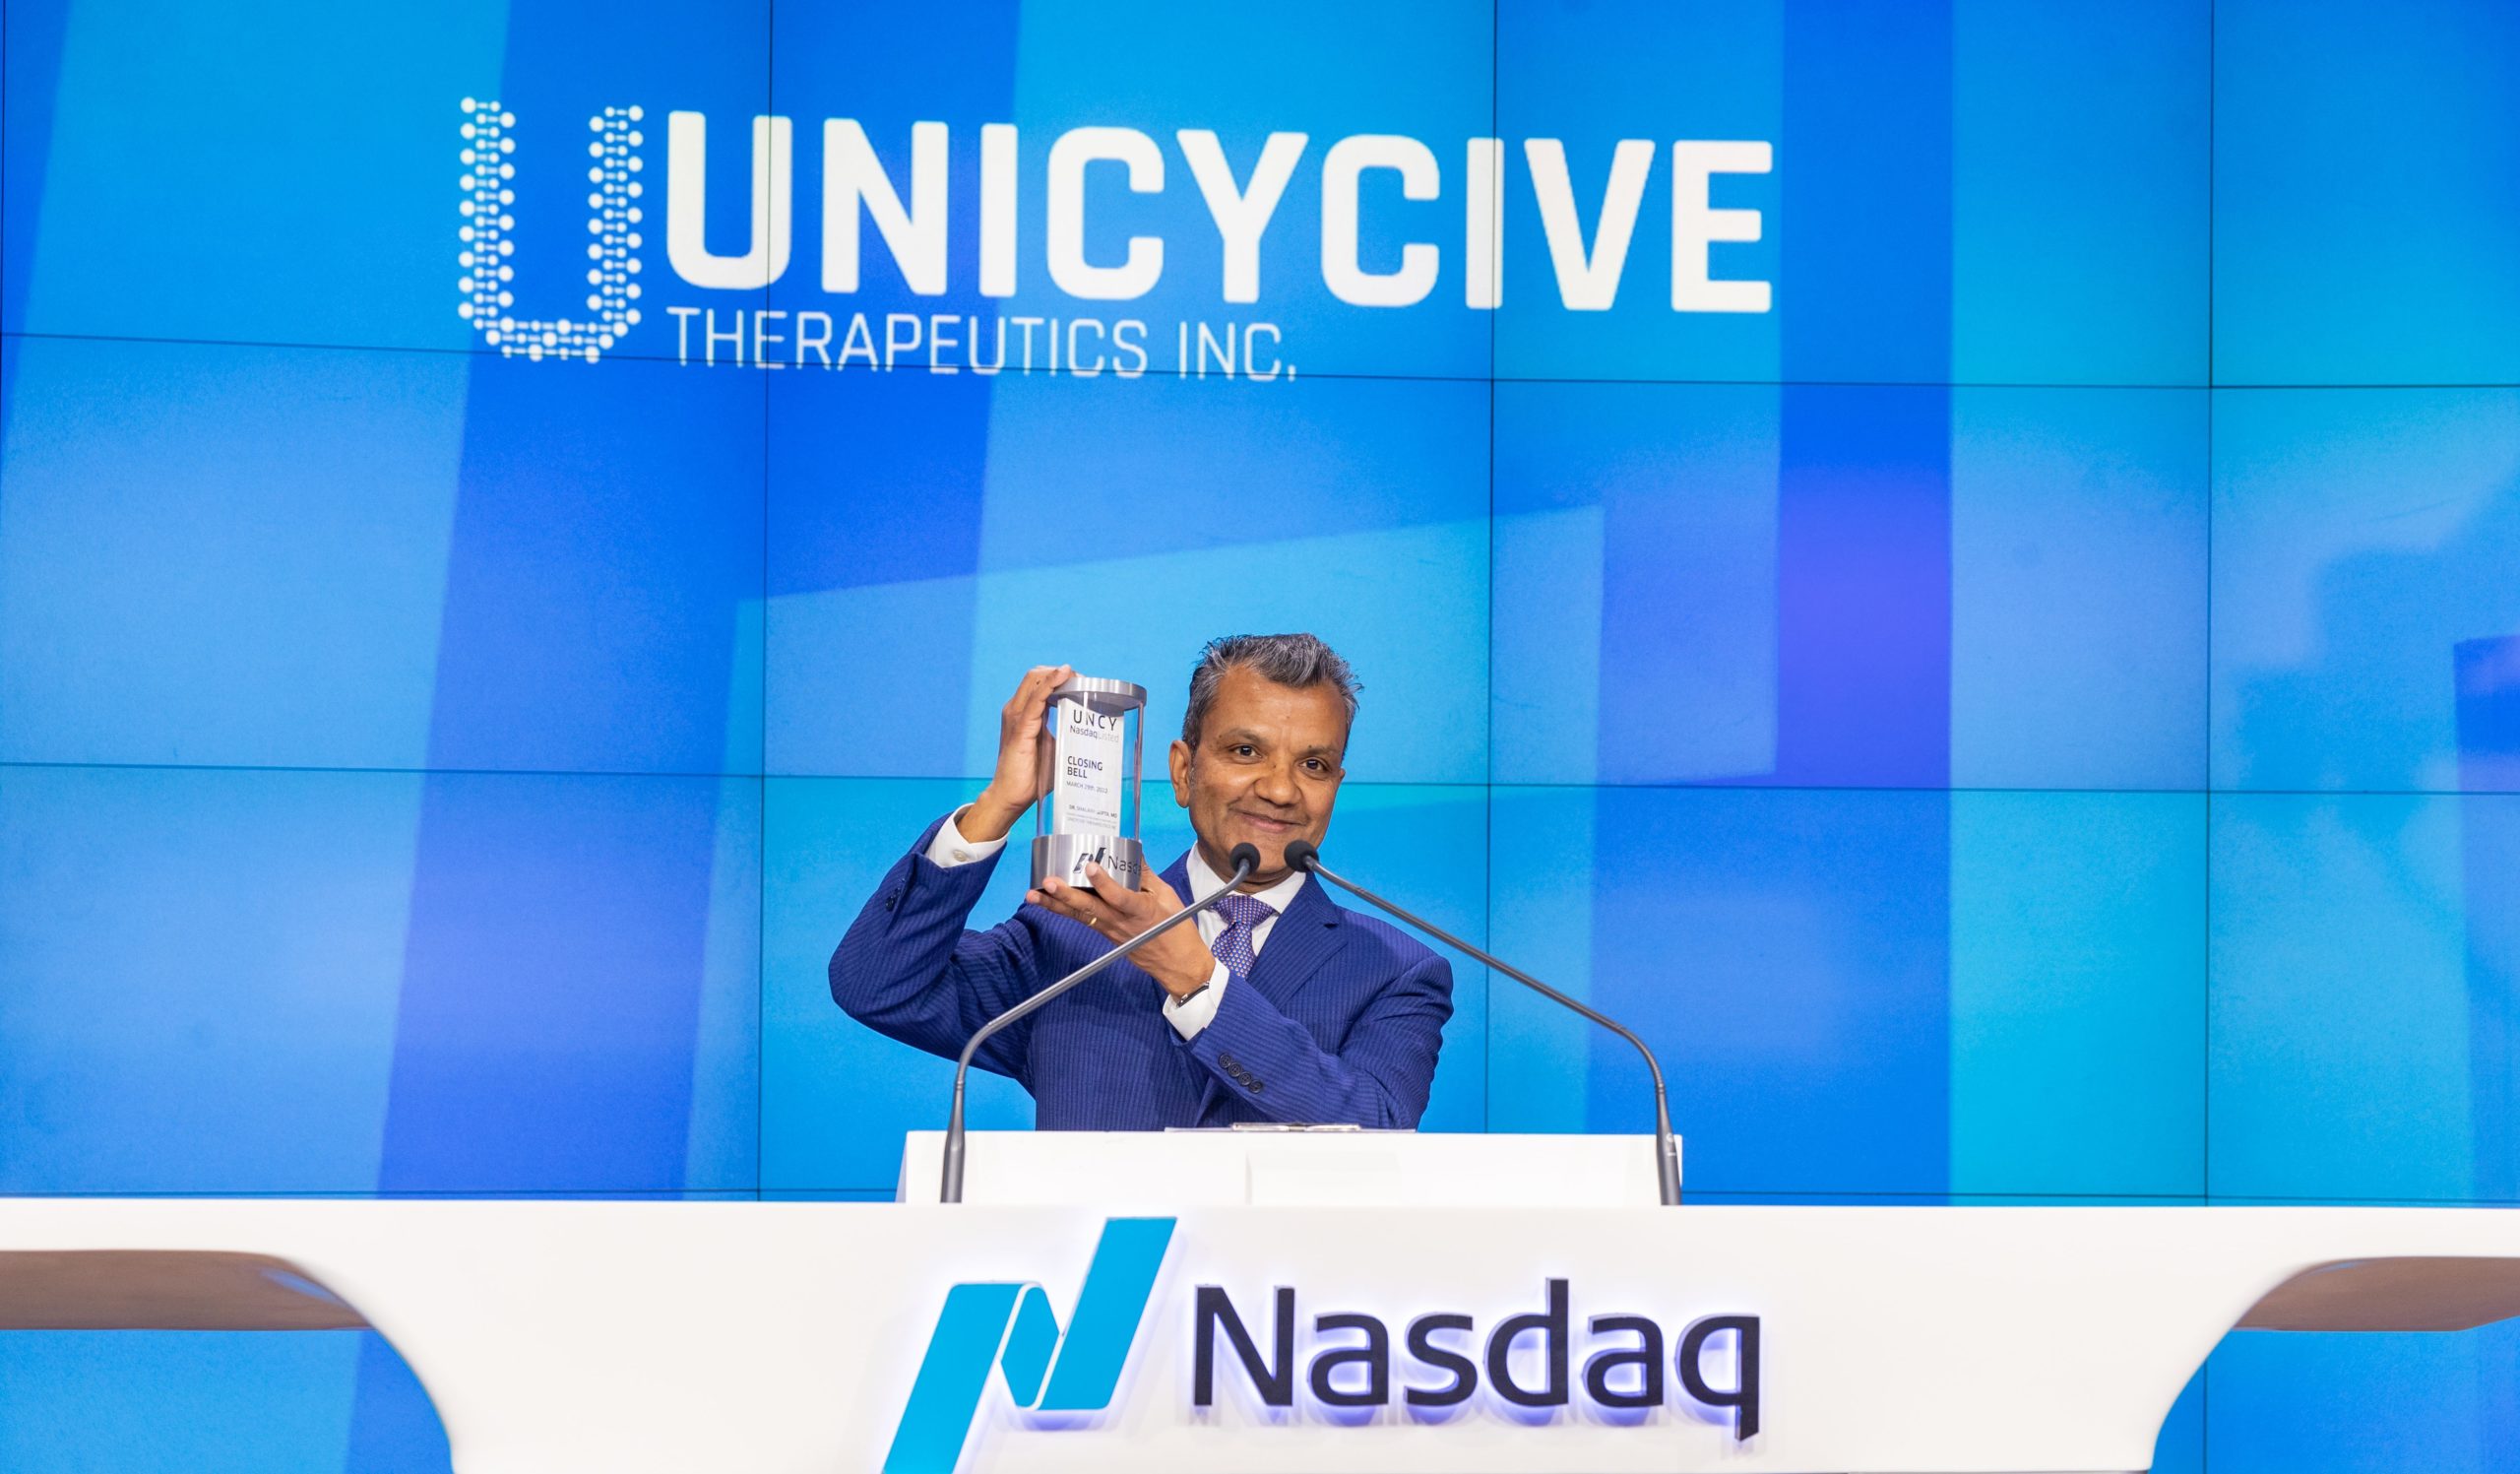 Unicycive Therapeutics Rings Nasdaq Closing Bell in Recognition of National Kidney Month - April 2022